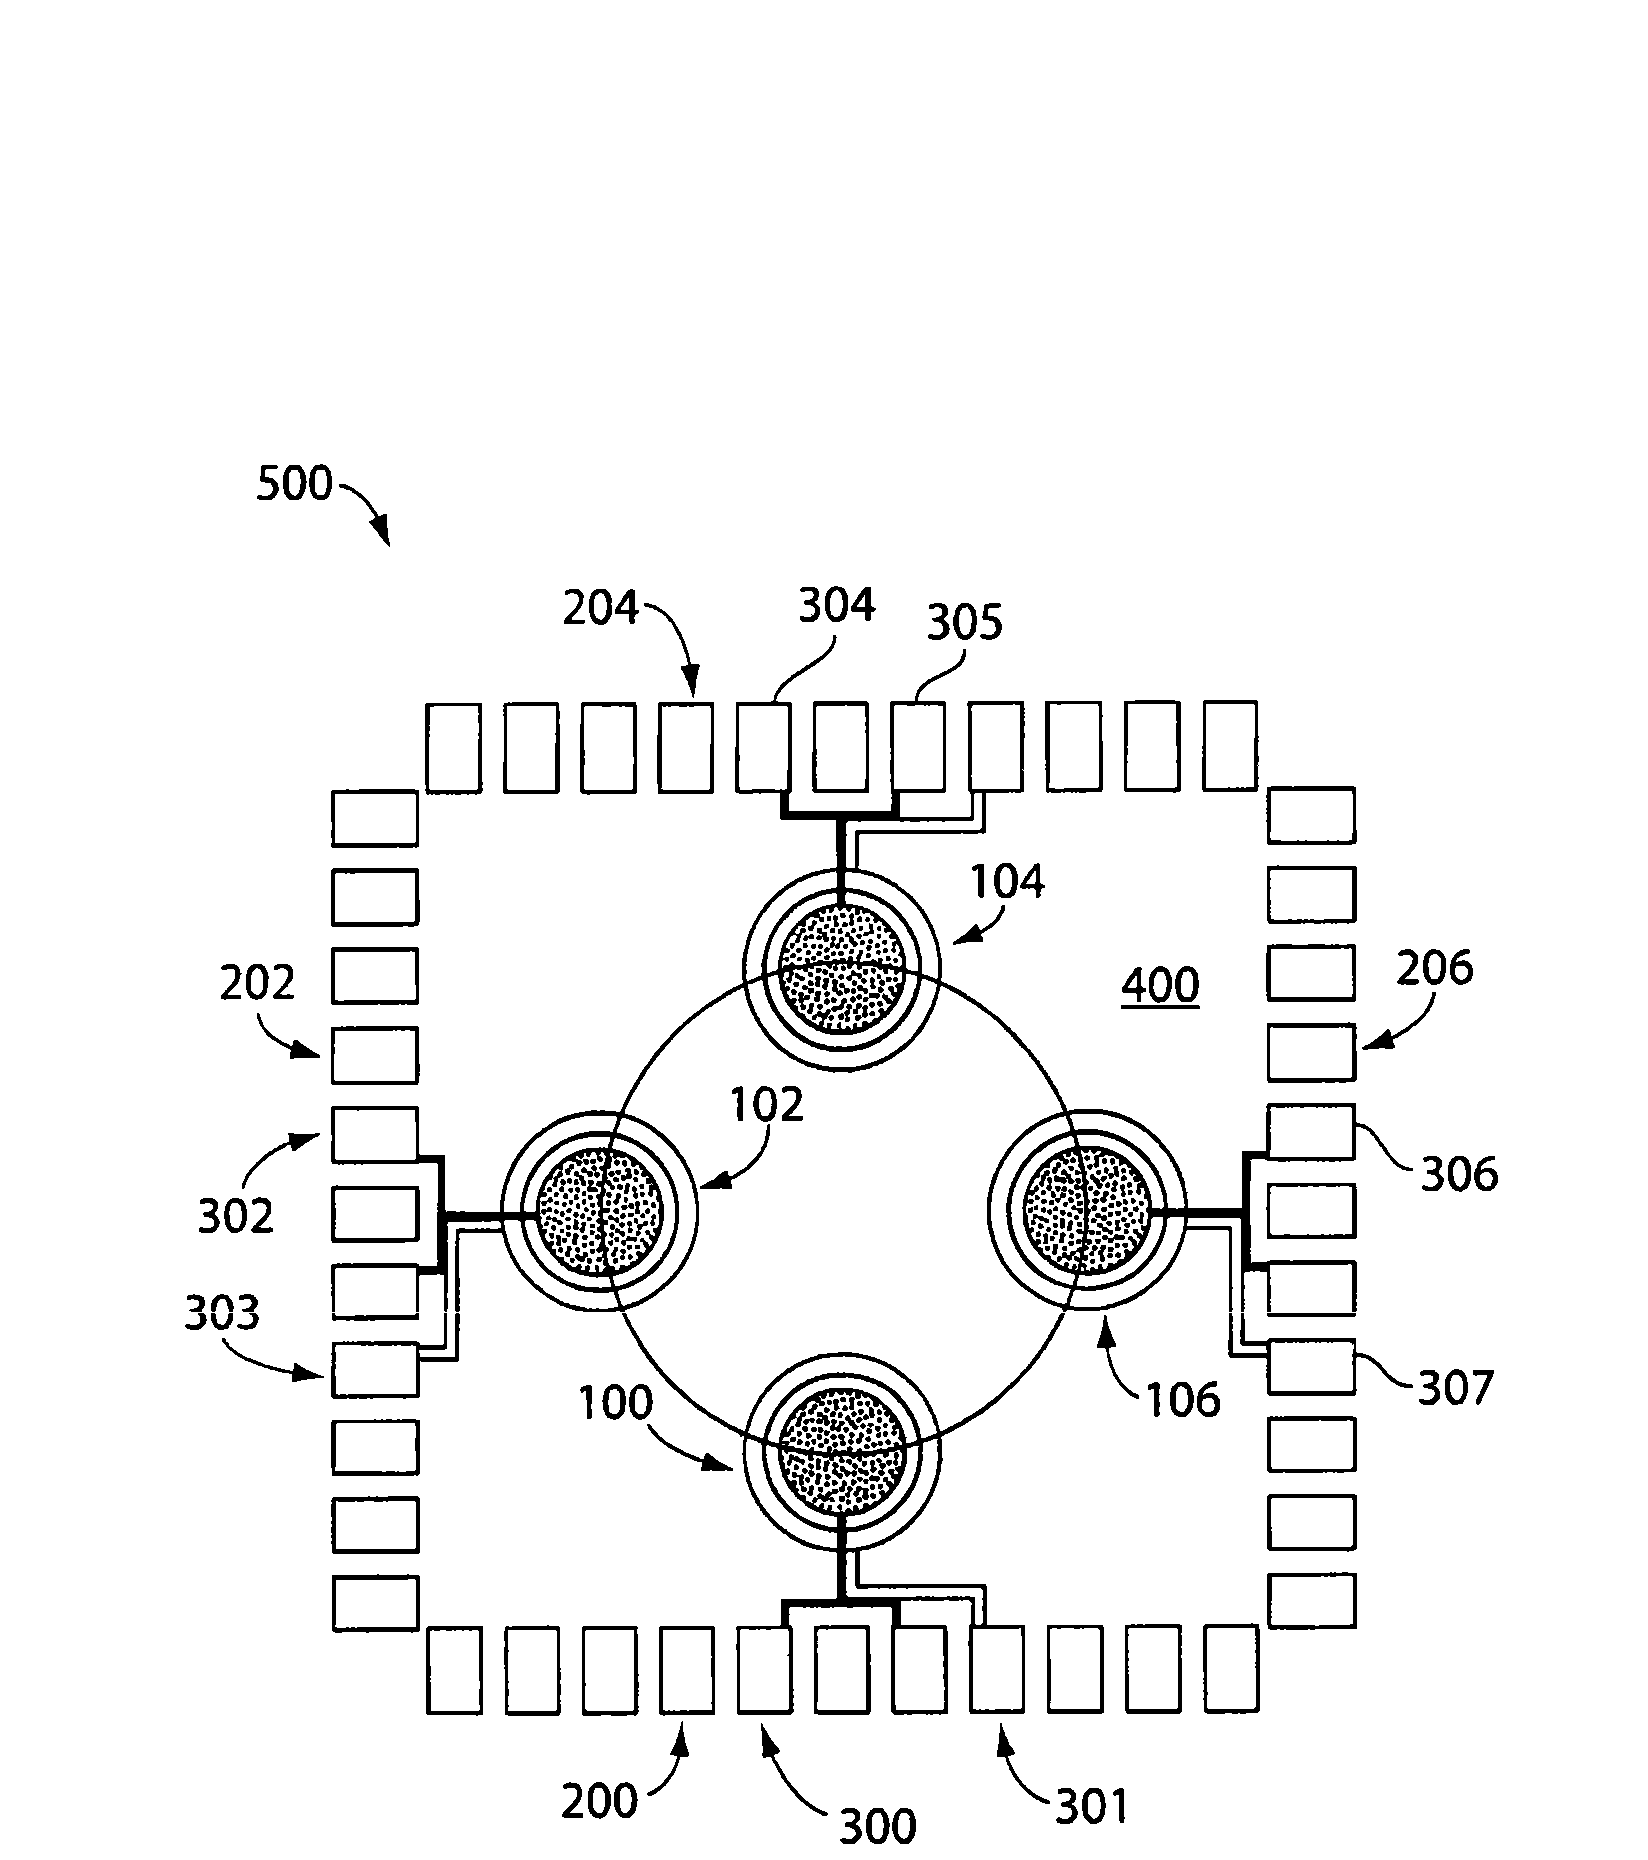 Electrochemical sensor with interdigitated microelectrodes and conductive polymer